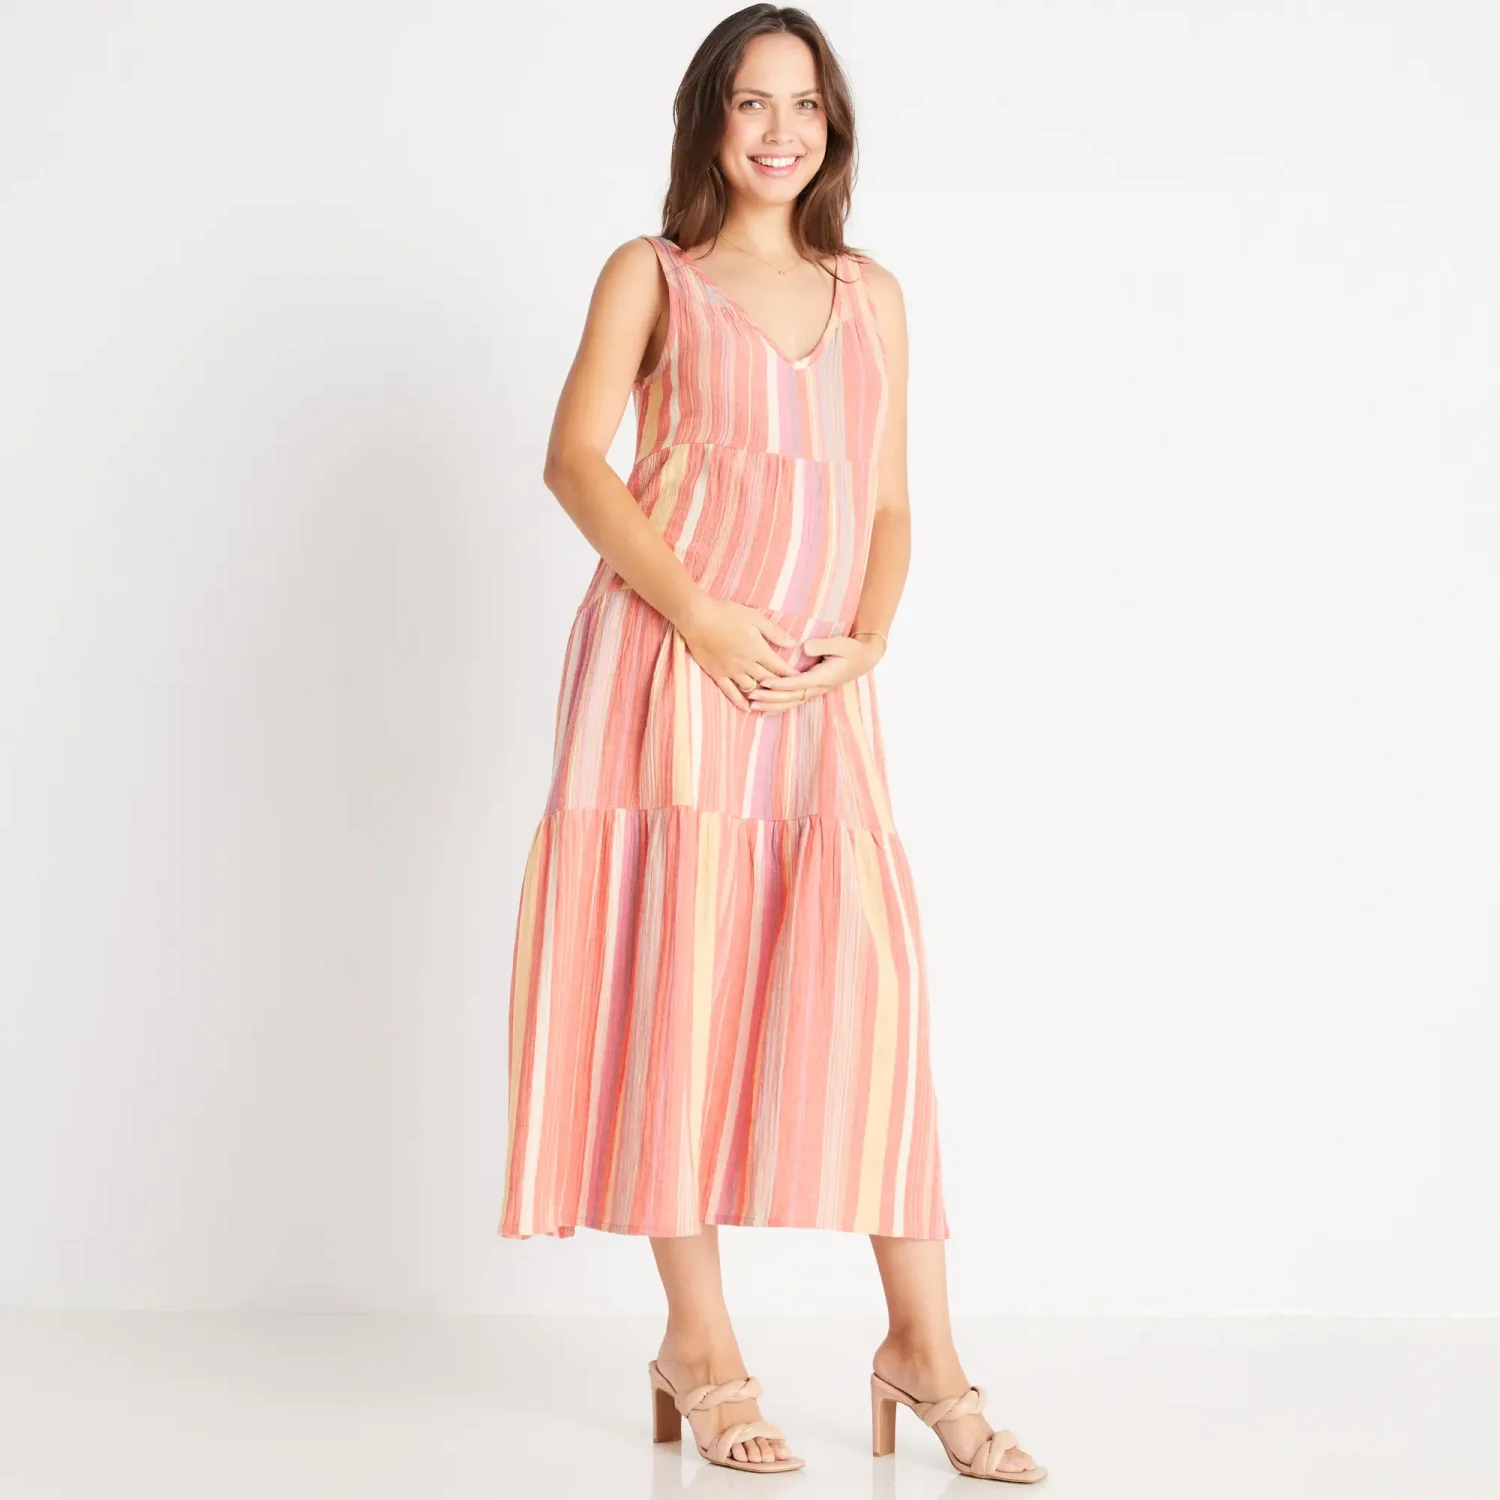 Marine Layer brand contemporary and stylish maternity friendly printed maxi dresses